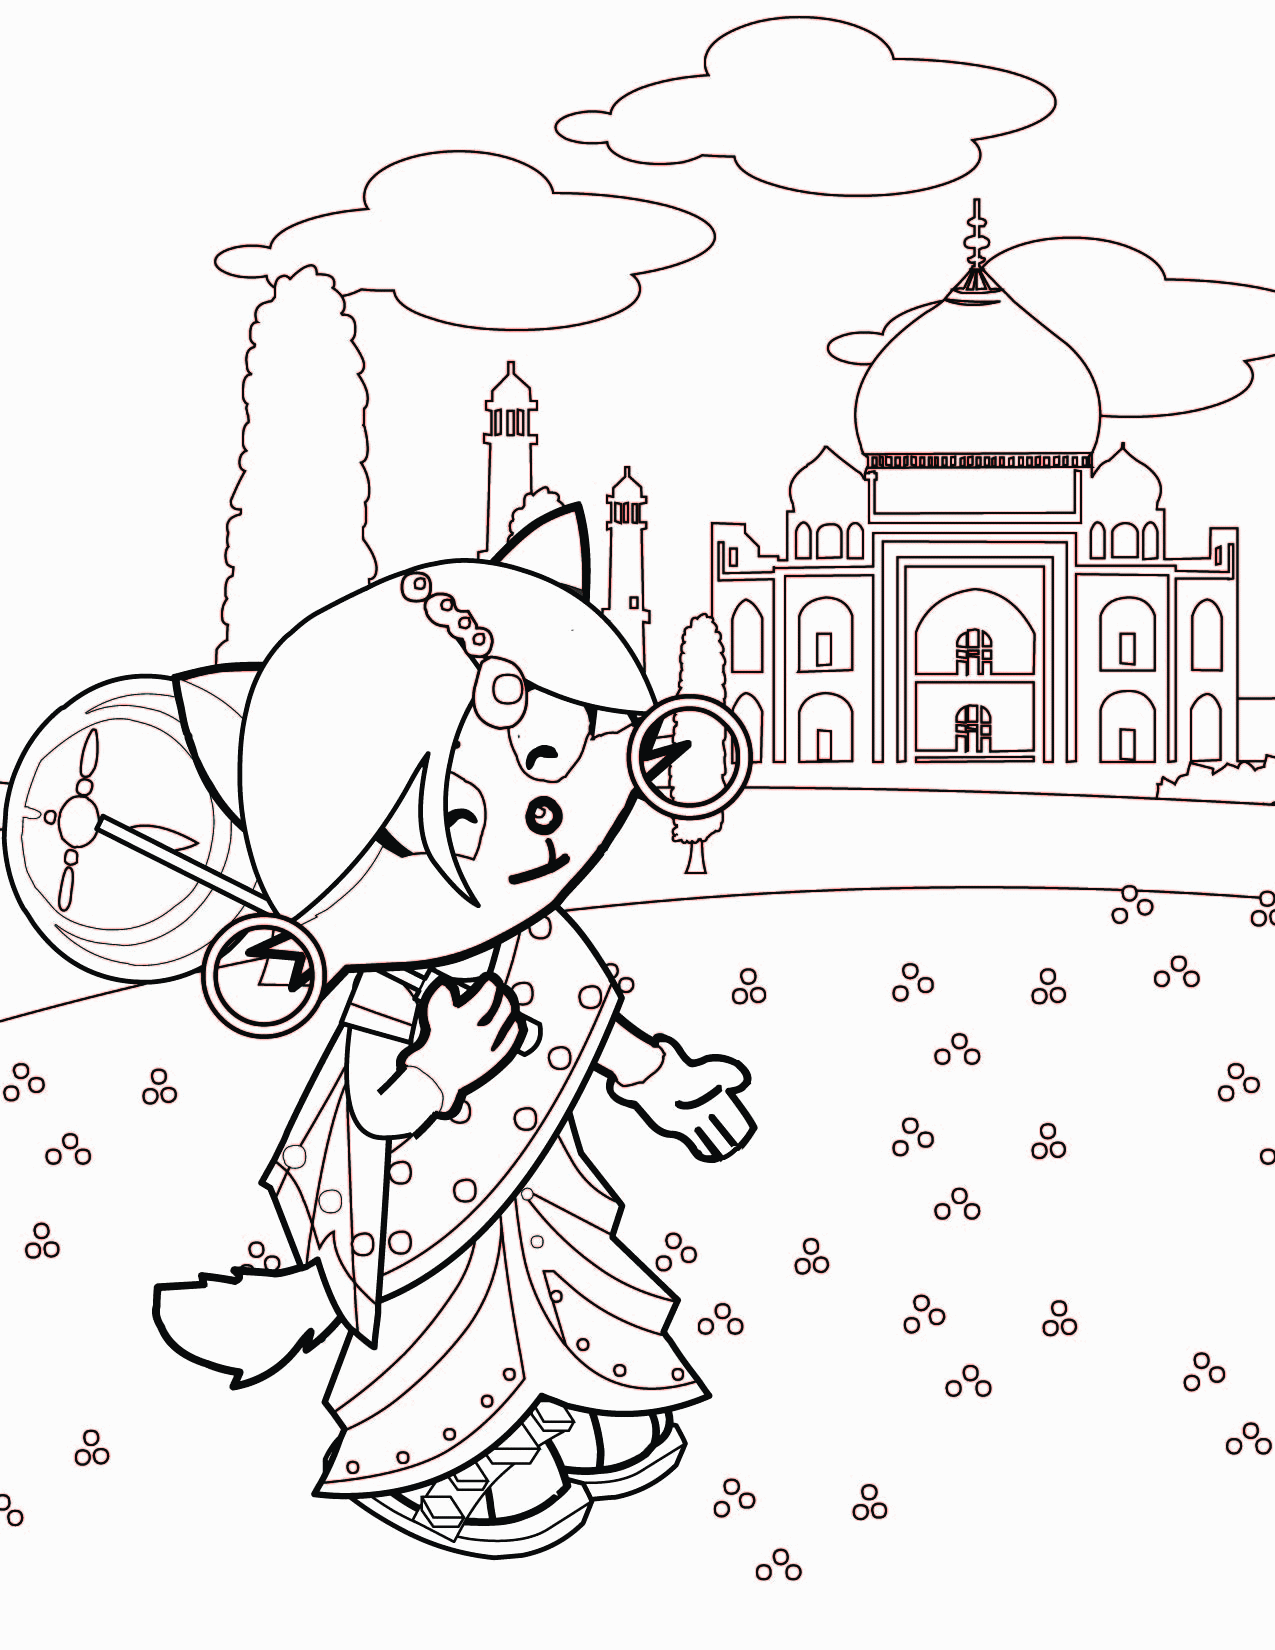 Indian Princess Coloring Page   Handipoints   Coloring Home